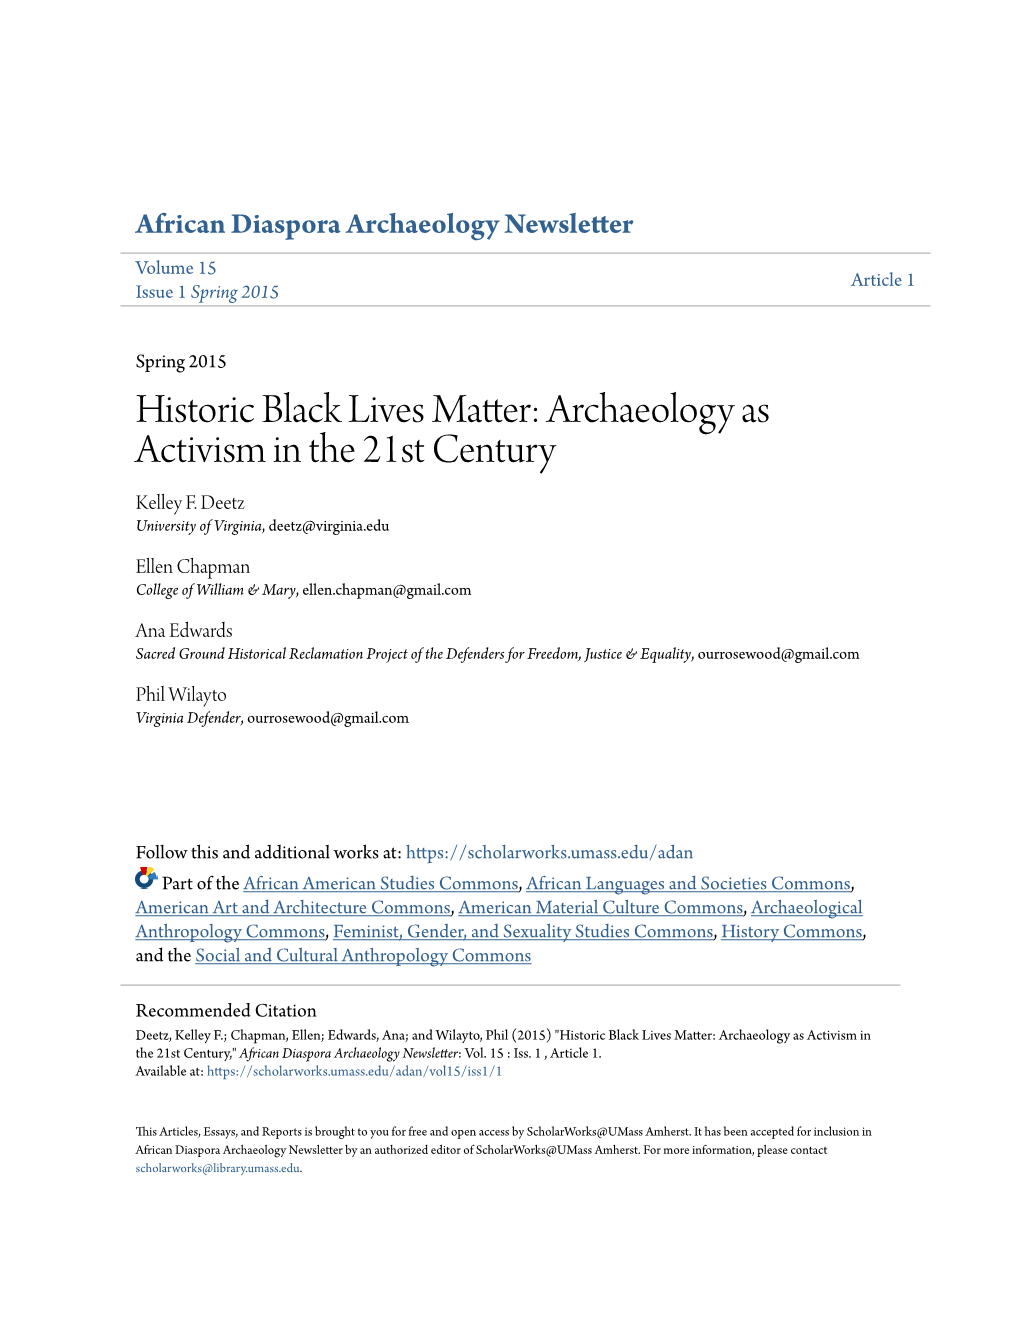 Historic Black Lives Matter: Archaeology As Activism in the 21St Century Kelley F